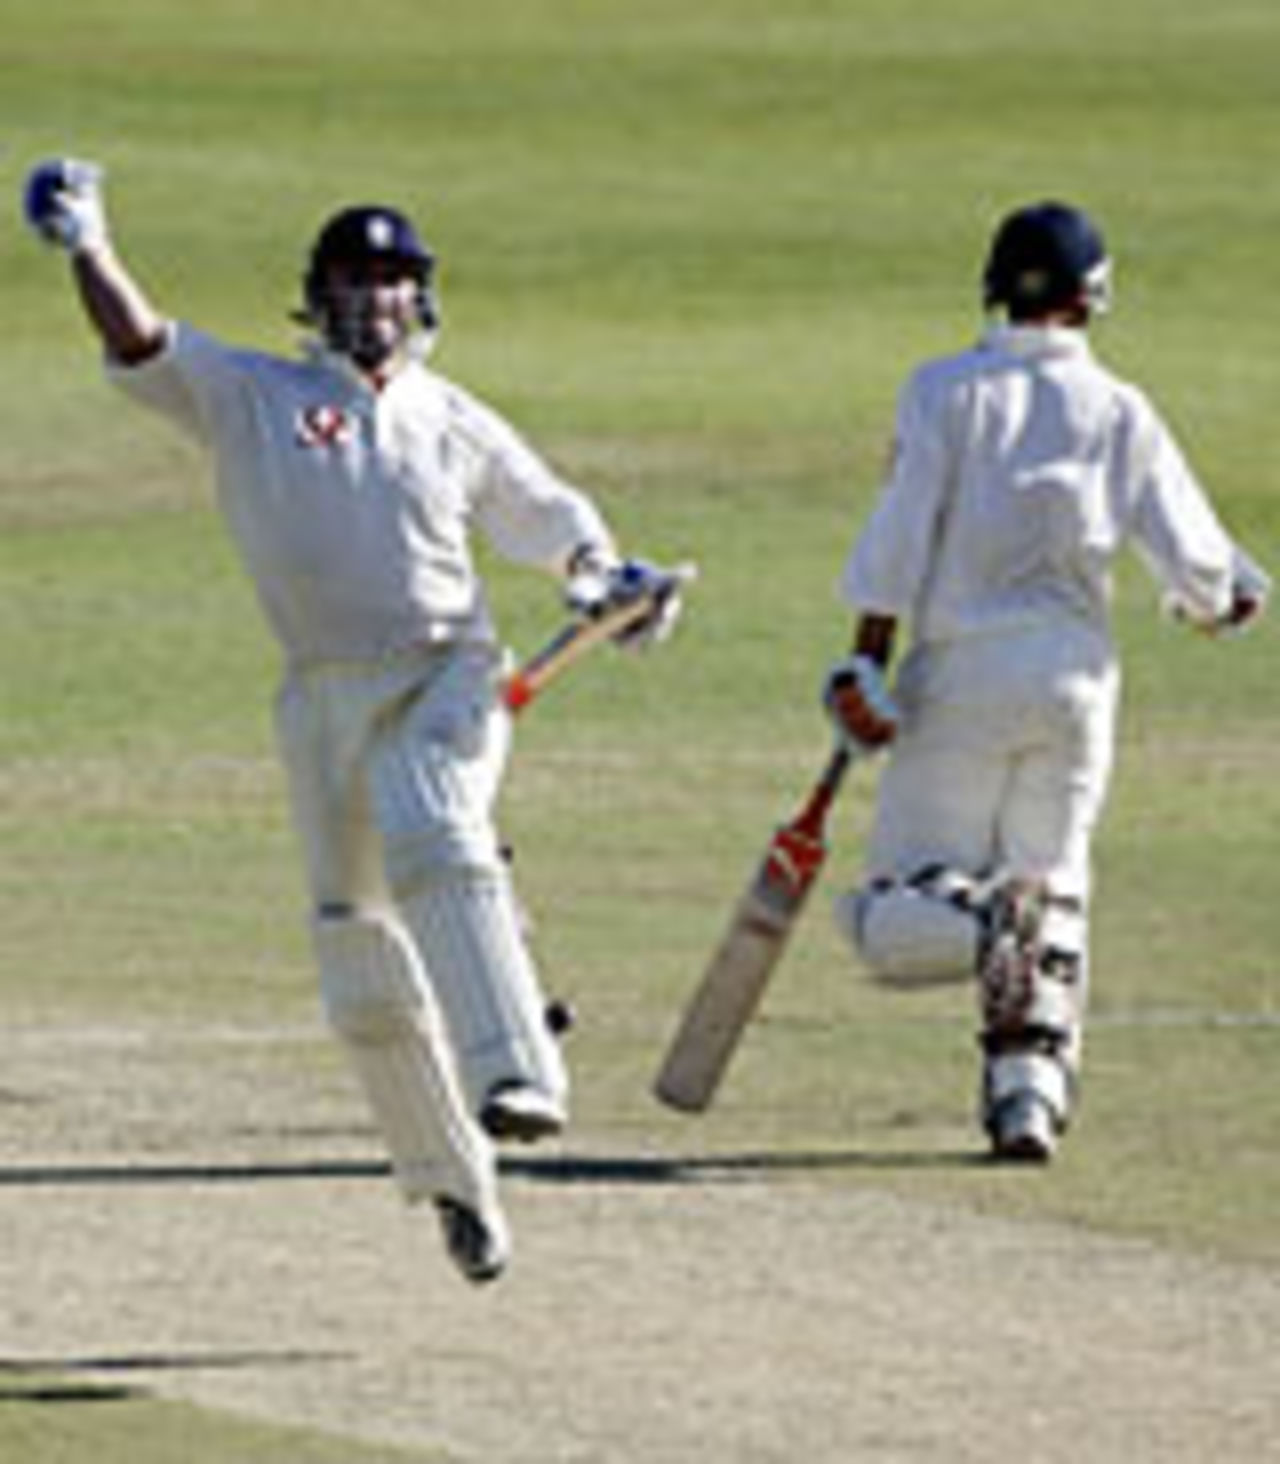 Graham Thorpe jumps at reaching his hundred, South Africa v England, 2nd Test, Durban, 4th day, December 29 2004